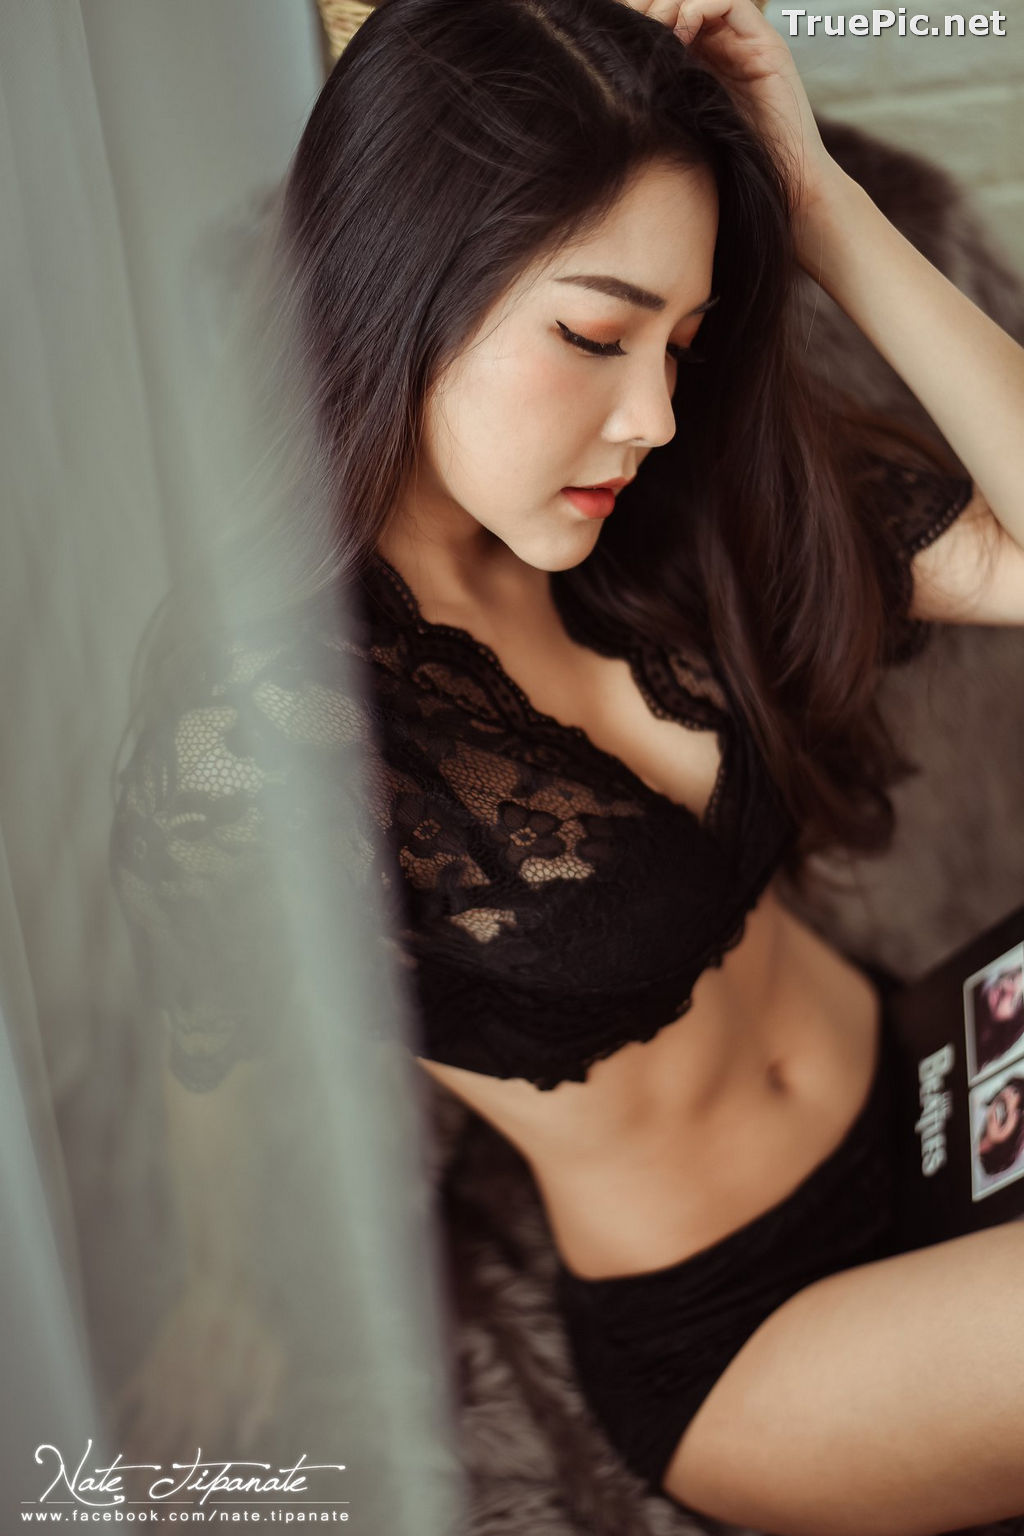 Image Thailand Model - Phitchamol Srijantanet - Black and White Lace Lingerie - TruePic.net - Picture-24